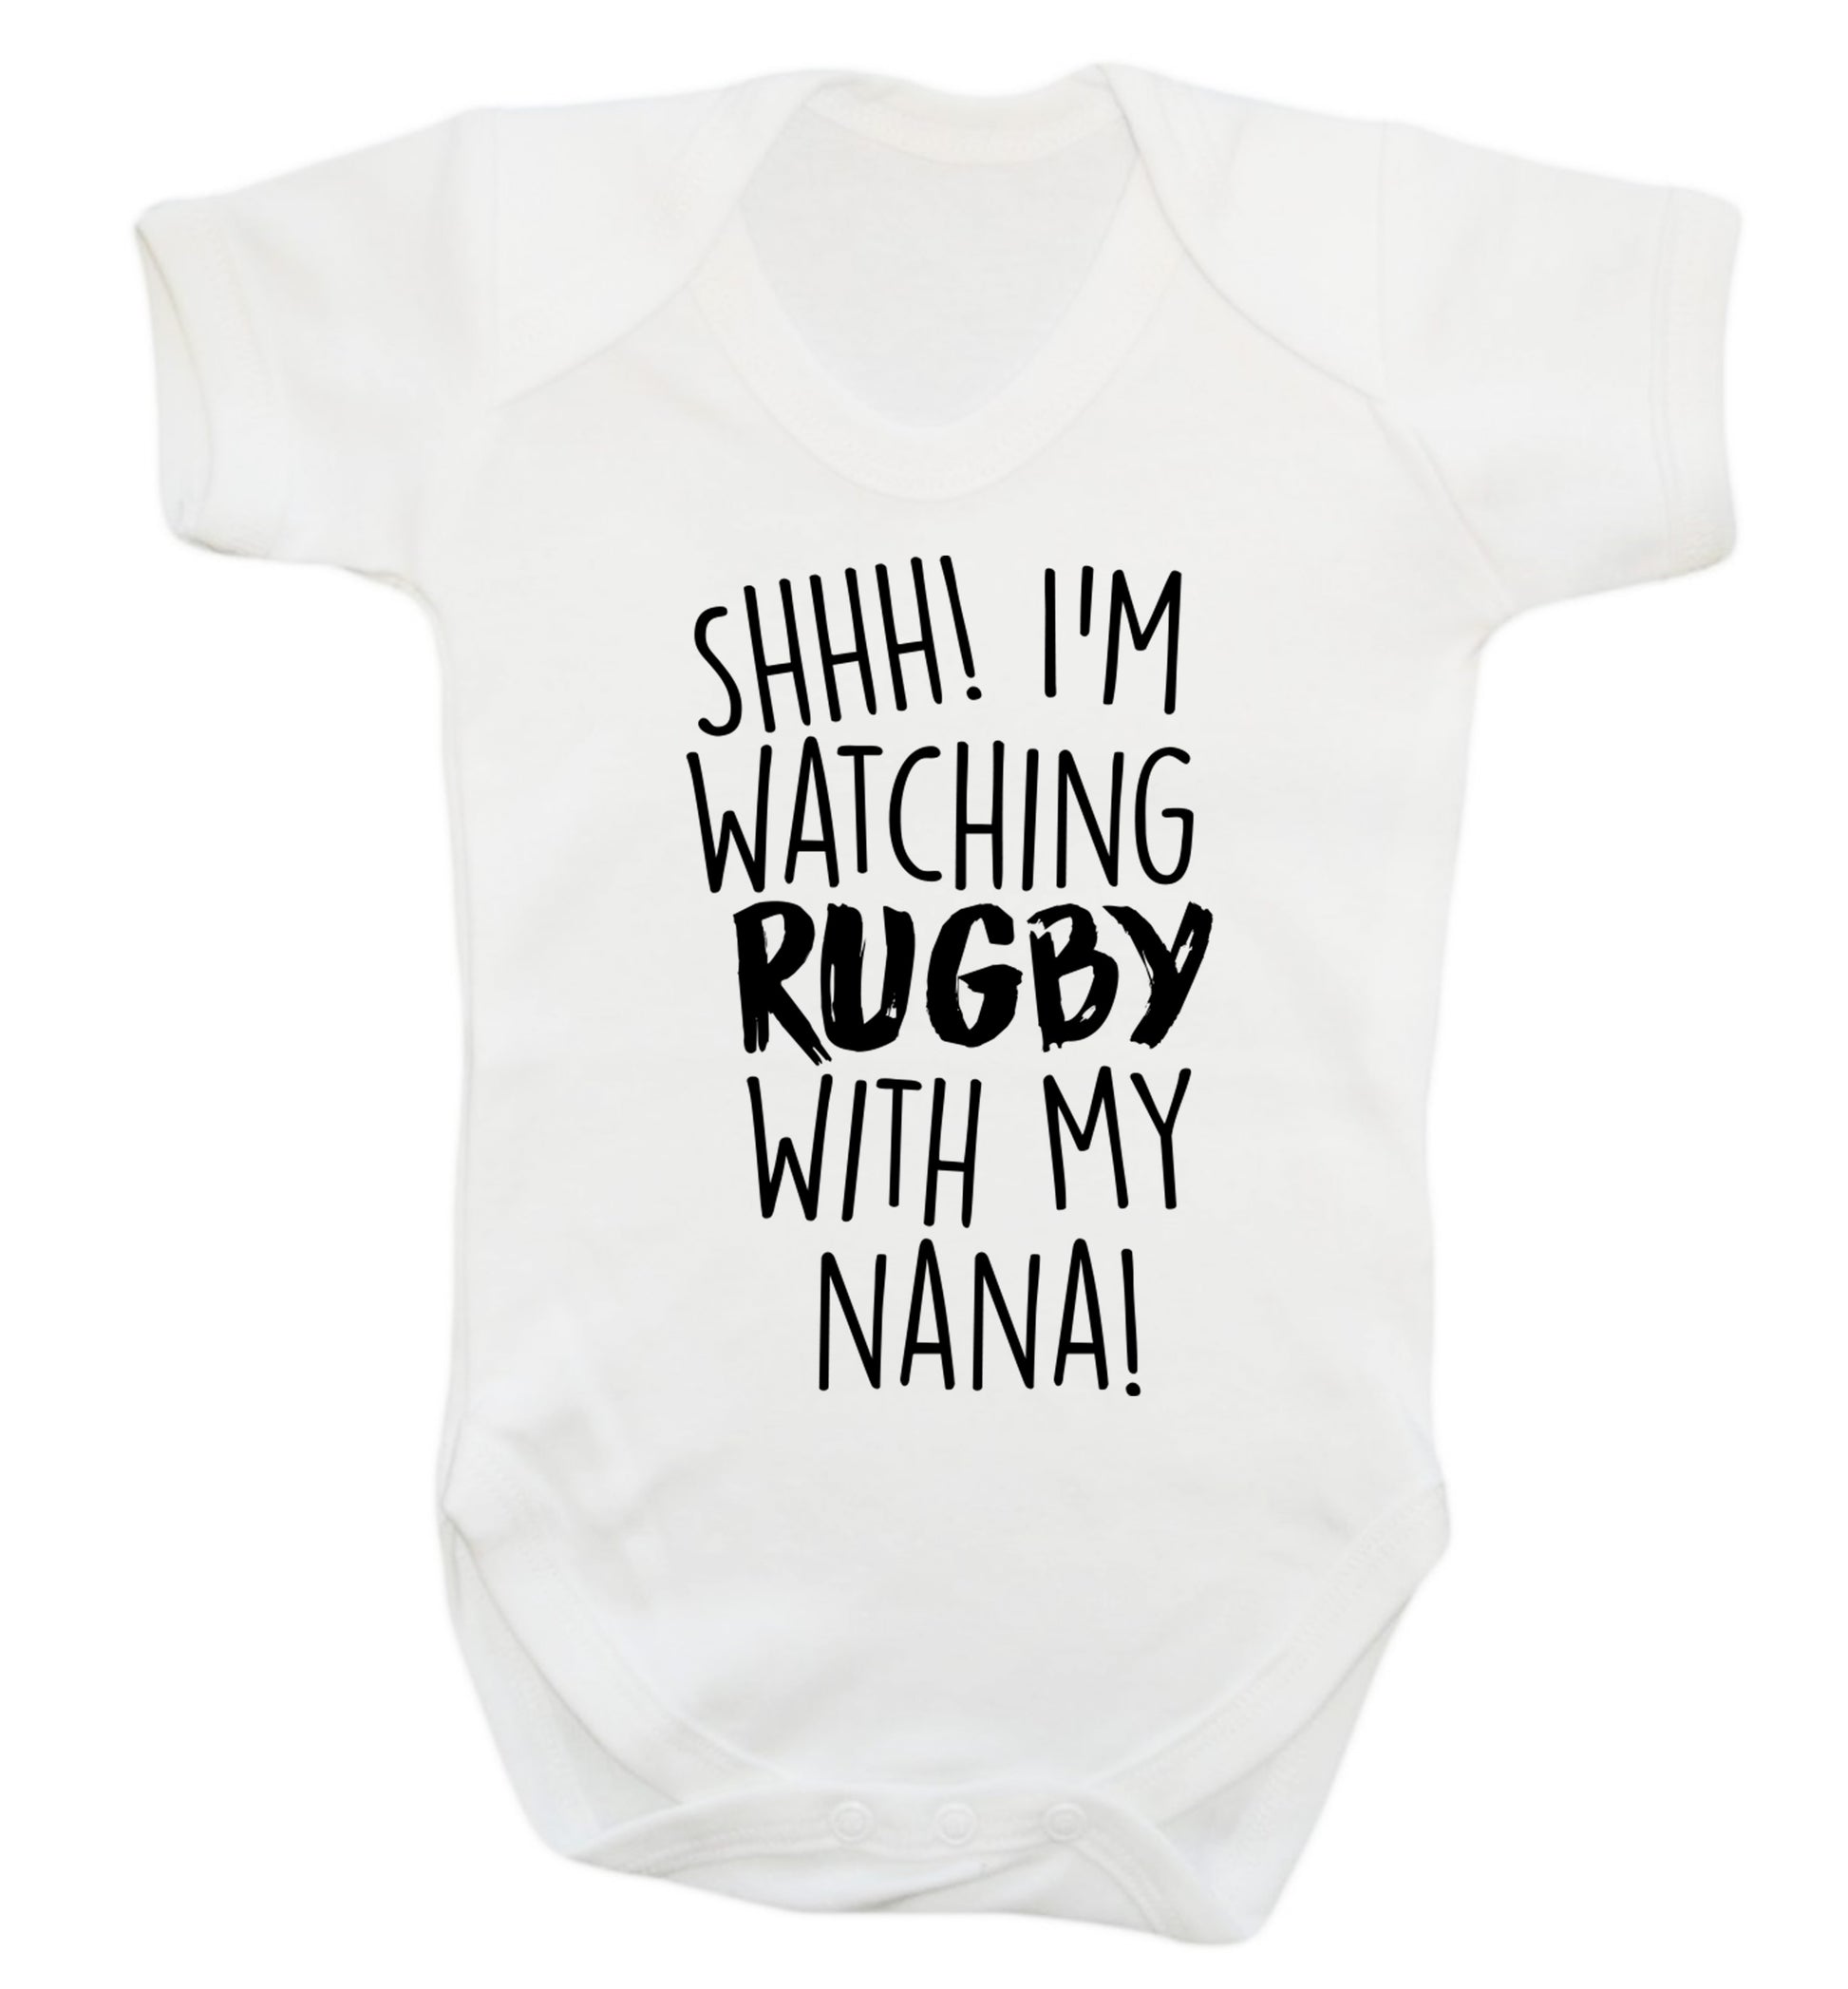 Shh I'm watching rugby with my nana Baby Vest white 18-24 months